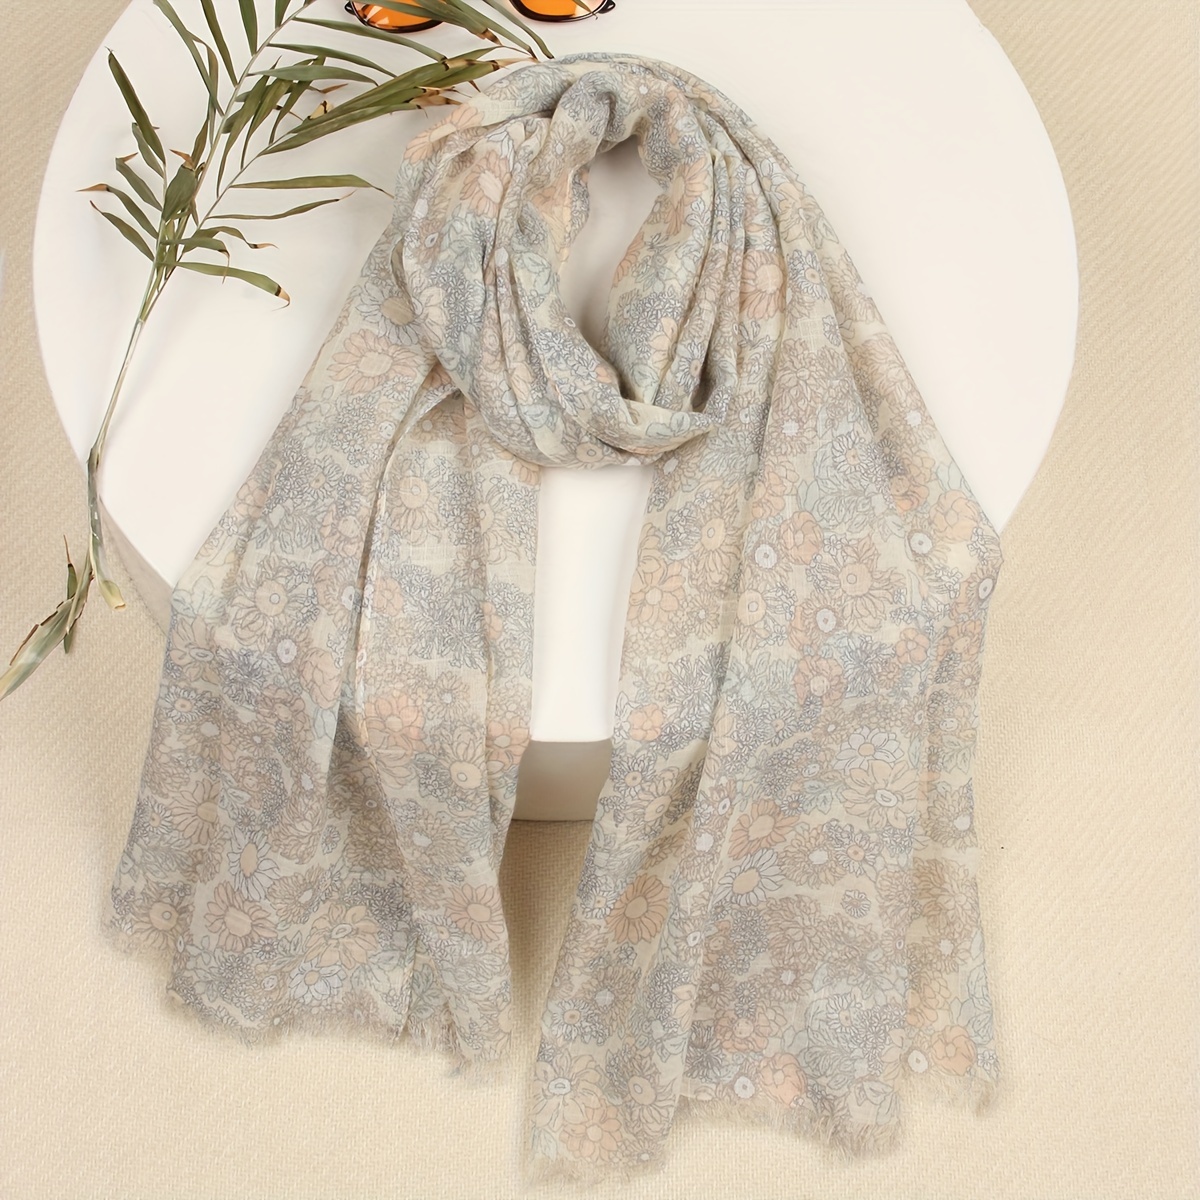 

Lightweight Floral Scarf For Women - Spring Summer Thin Breathable Shawl With Elegant Flower Print Design, Soft Accessory For Outfits